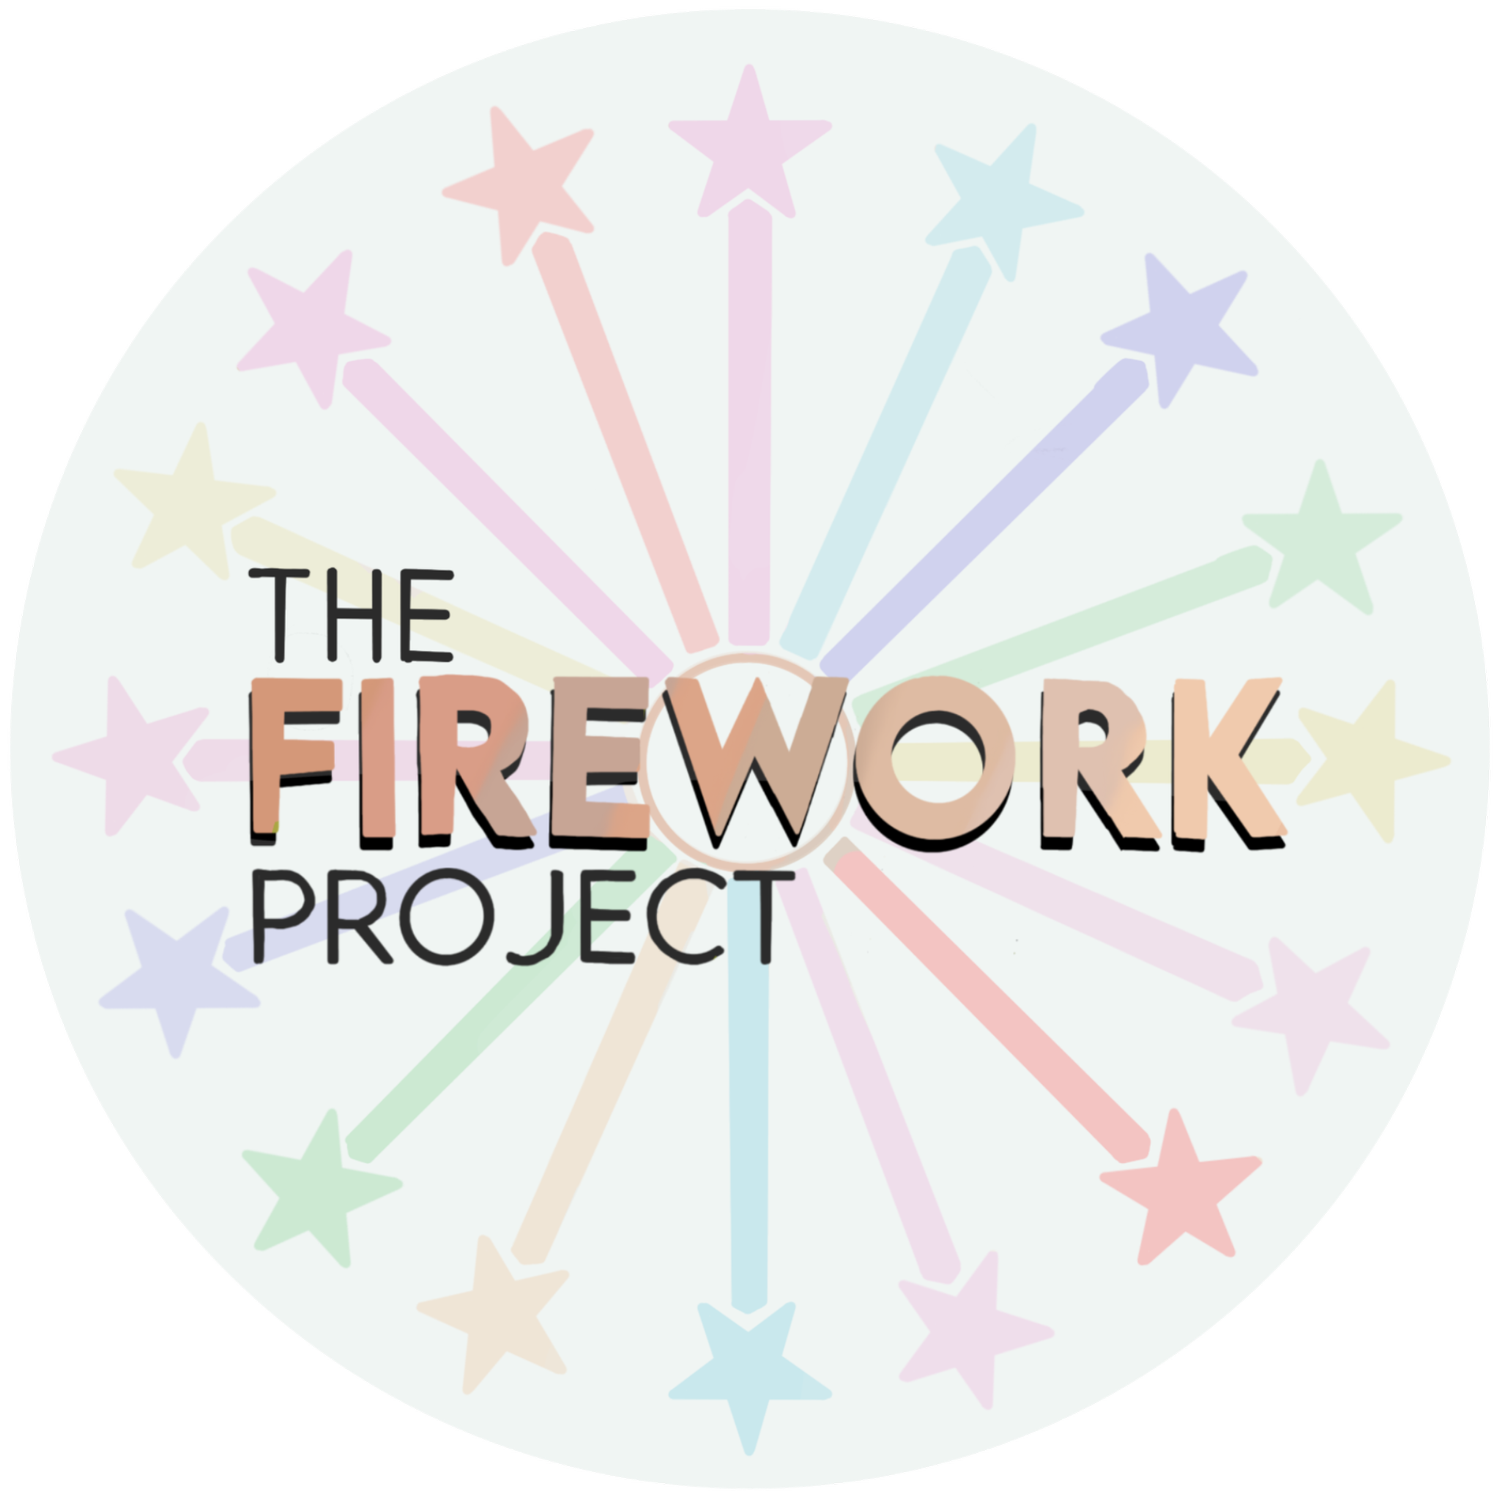 The Firework Project